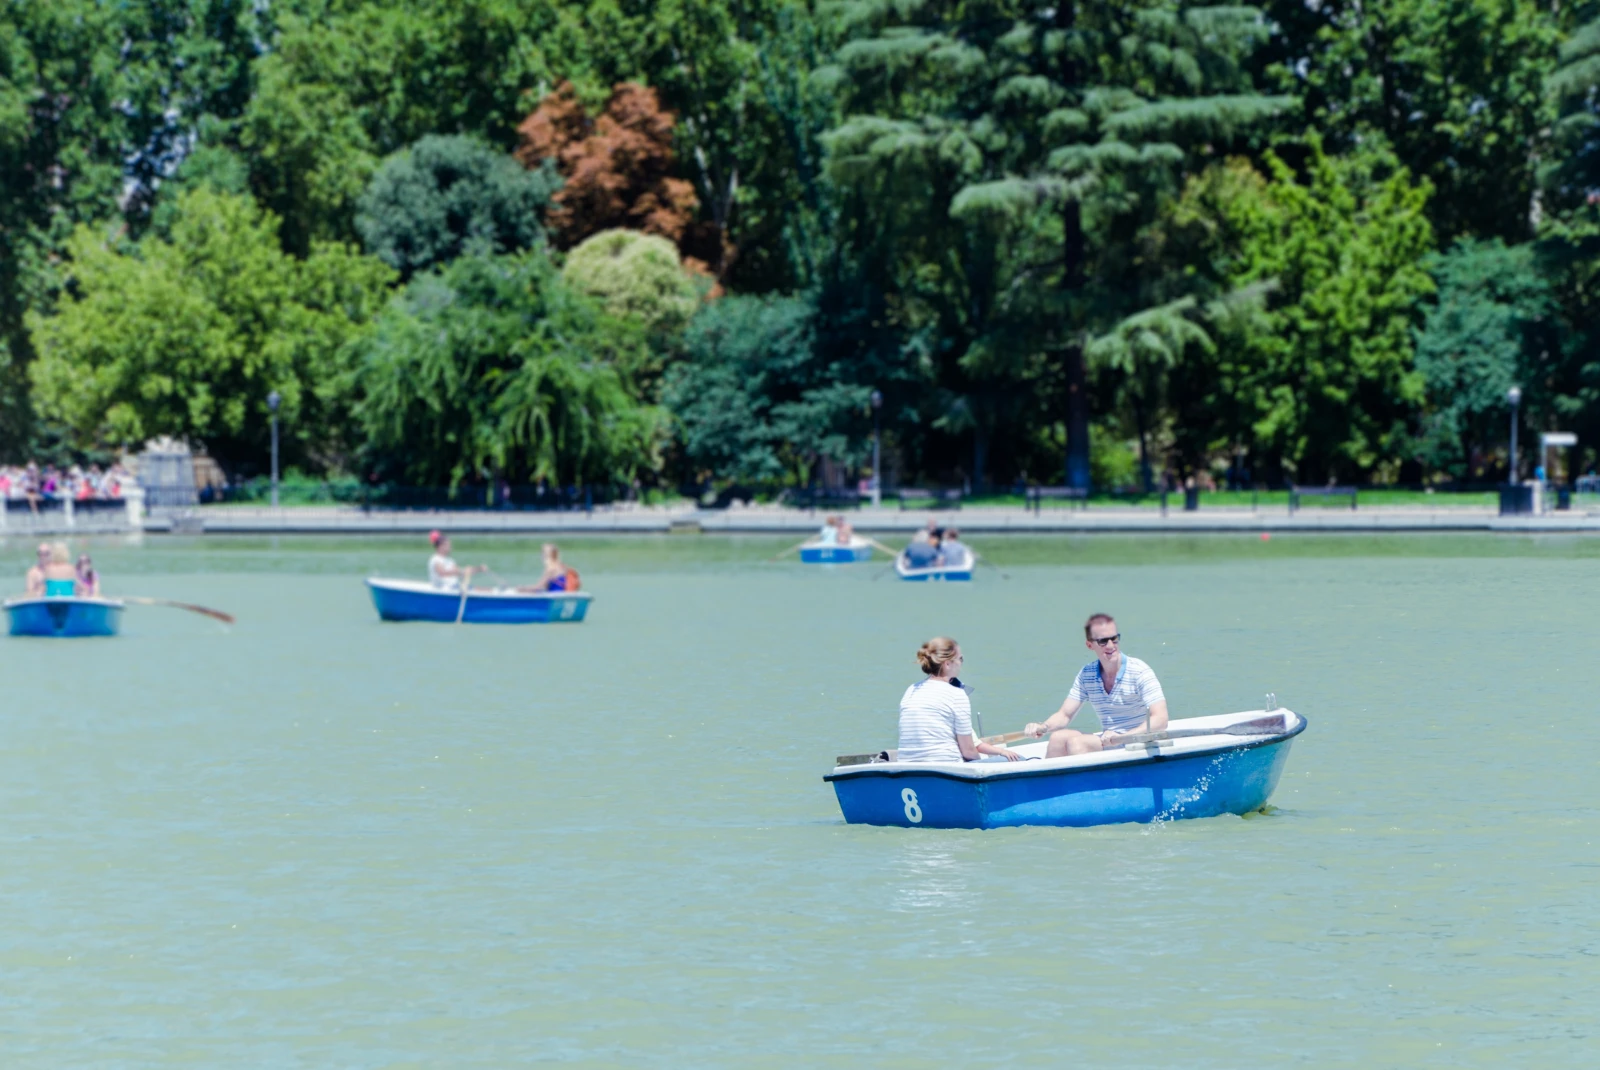 El Retiro Park in Madrid with five boats with couples in them on a lake.